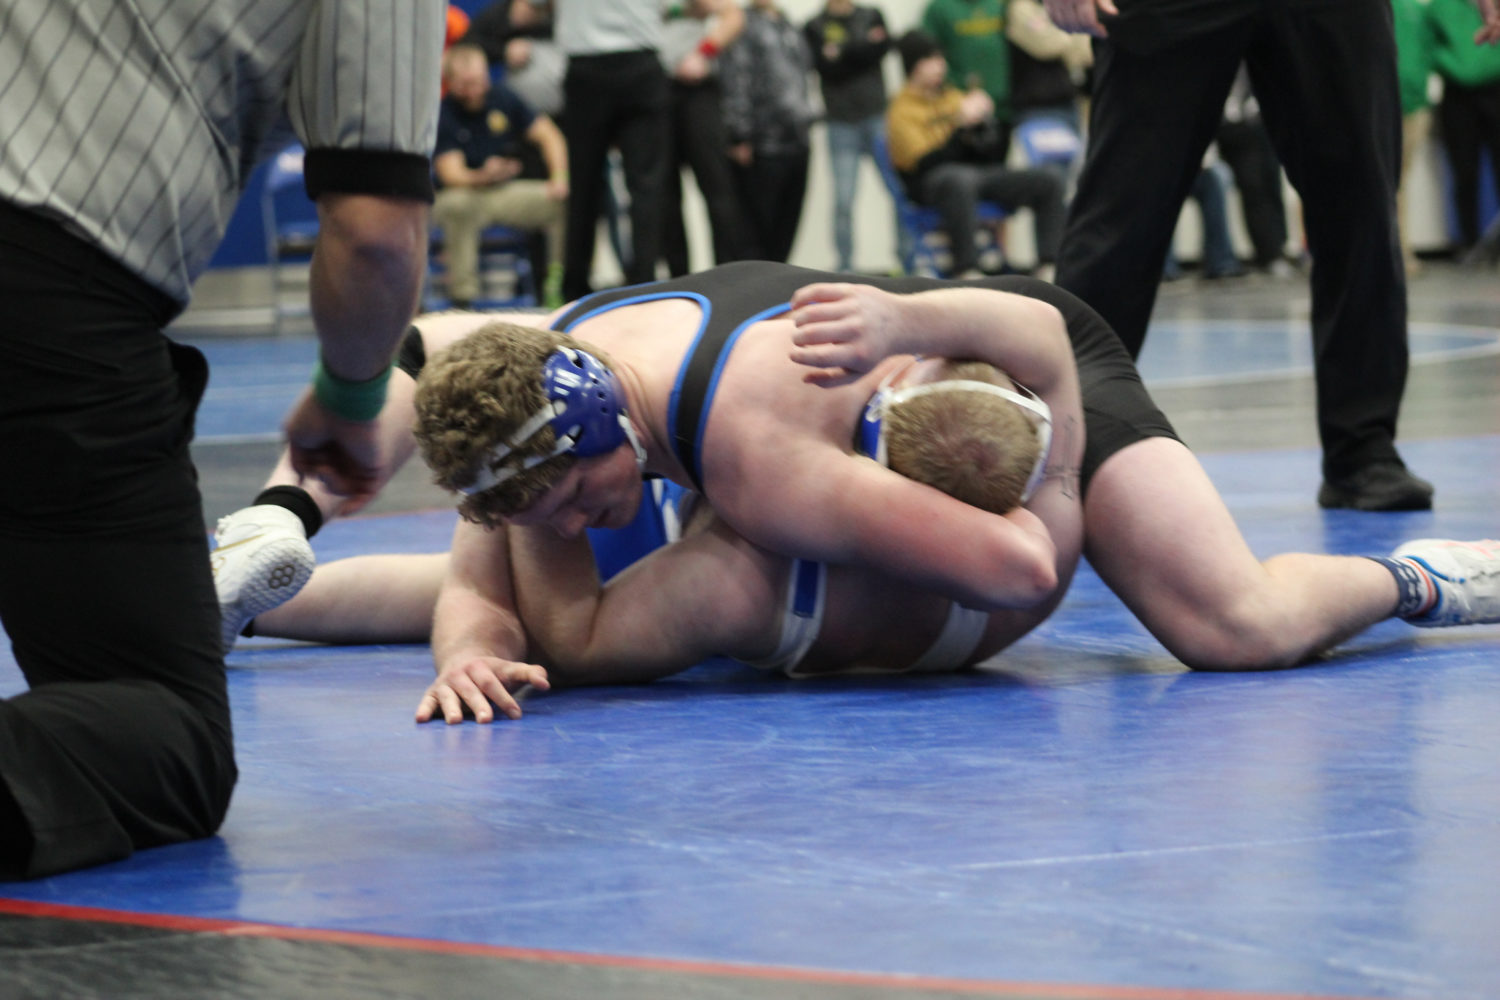 Merrill Wrestling Team takes third at Bluejay Challenge, Depies and Ball both grapple into first place